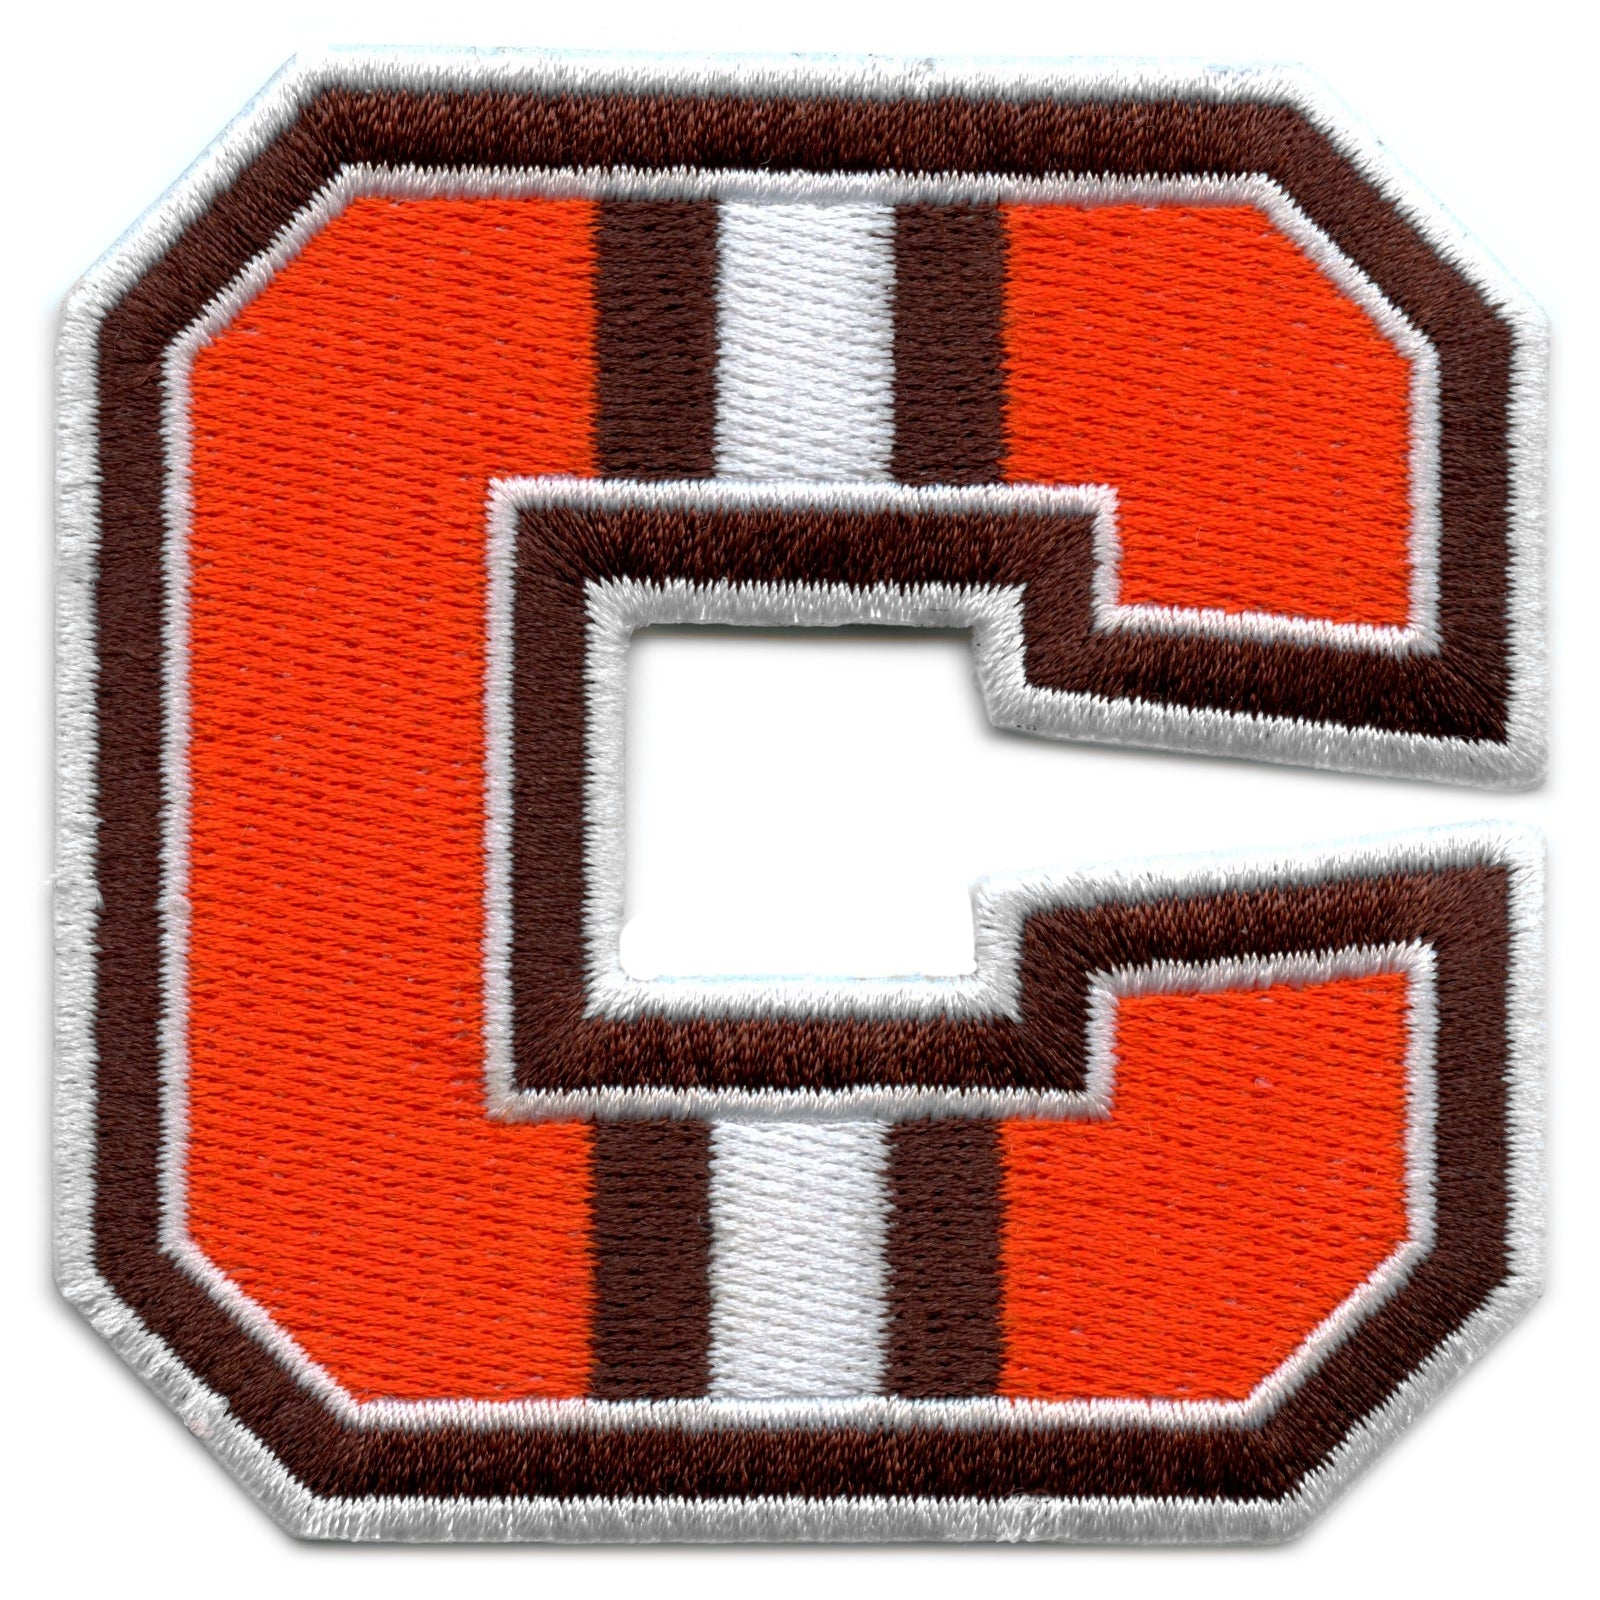 City Of Cleveland "C" Logo Football Jersey Parody Embroidered Iron On Patch 